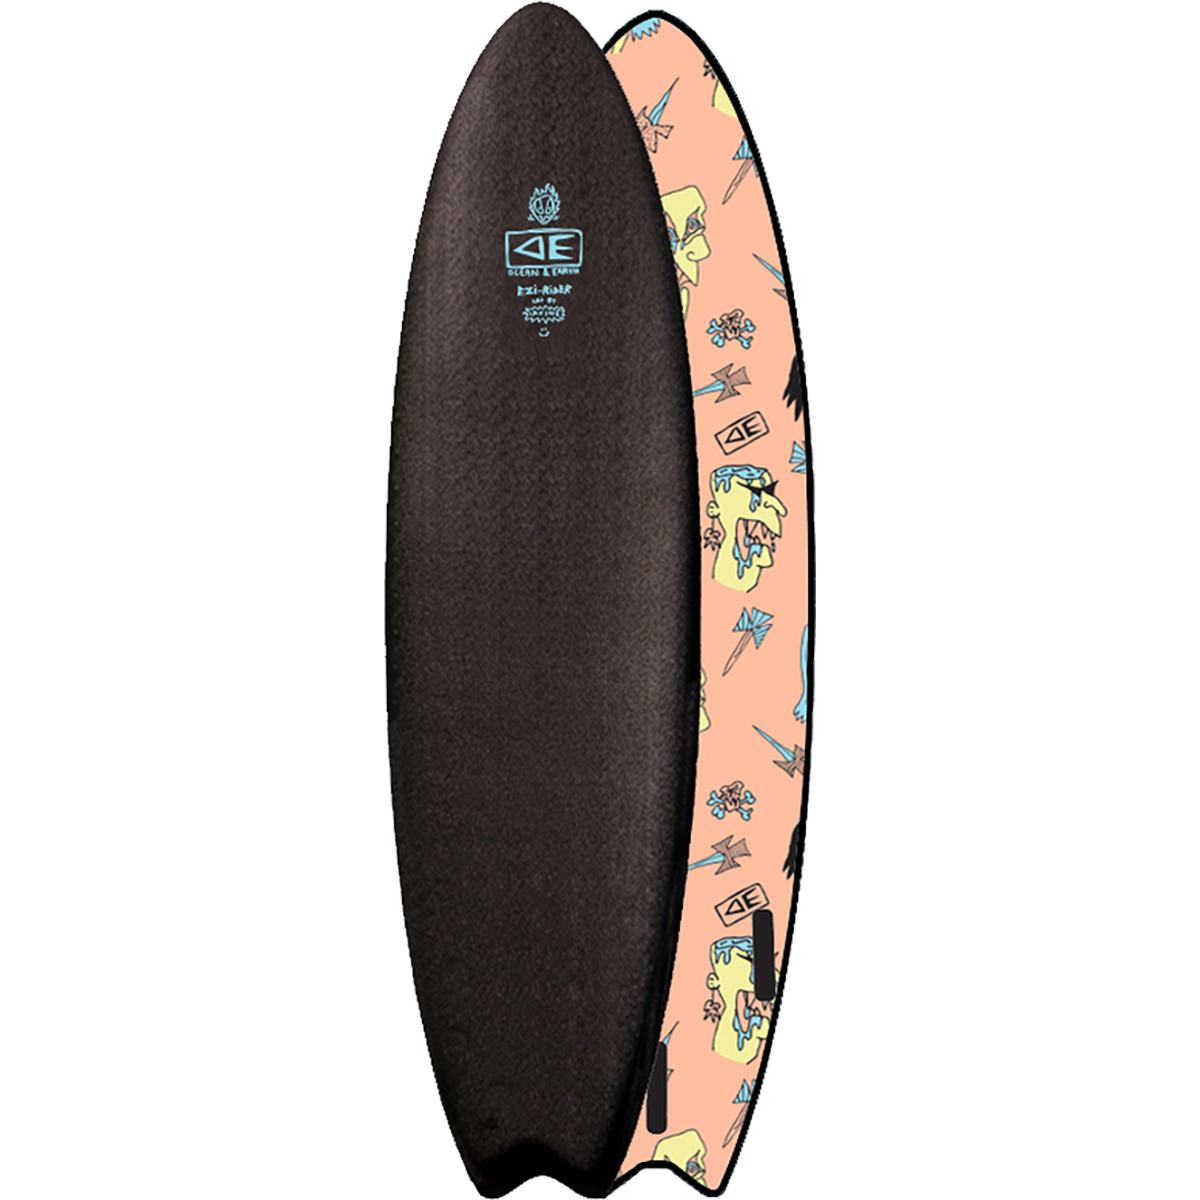 Ocean and Earth Soft Top Surfboard Ezi-Rider Brains 7'0" Black - Invisible Board Shop